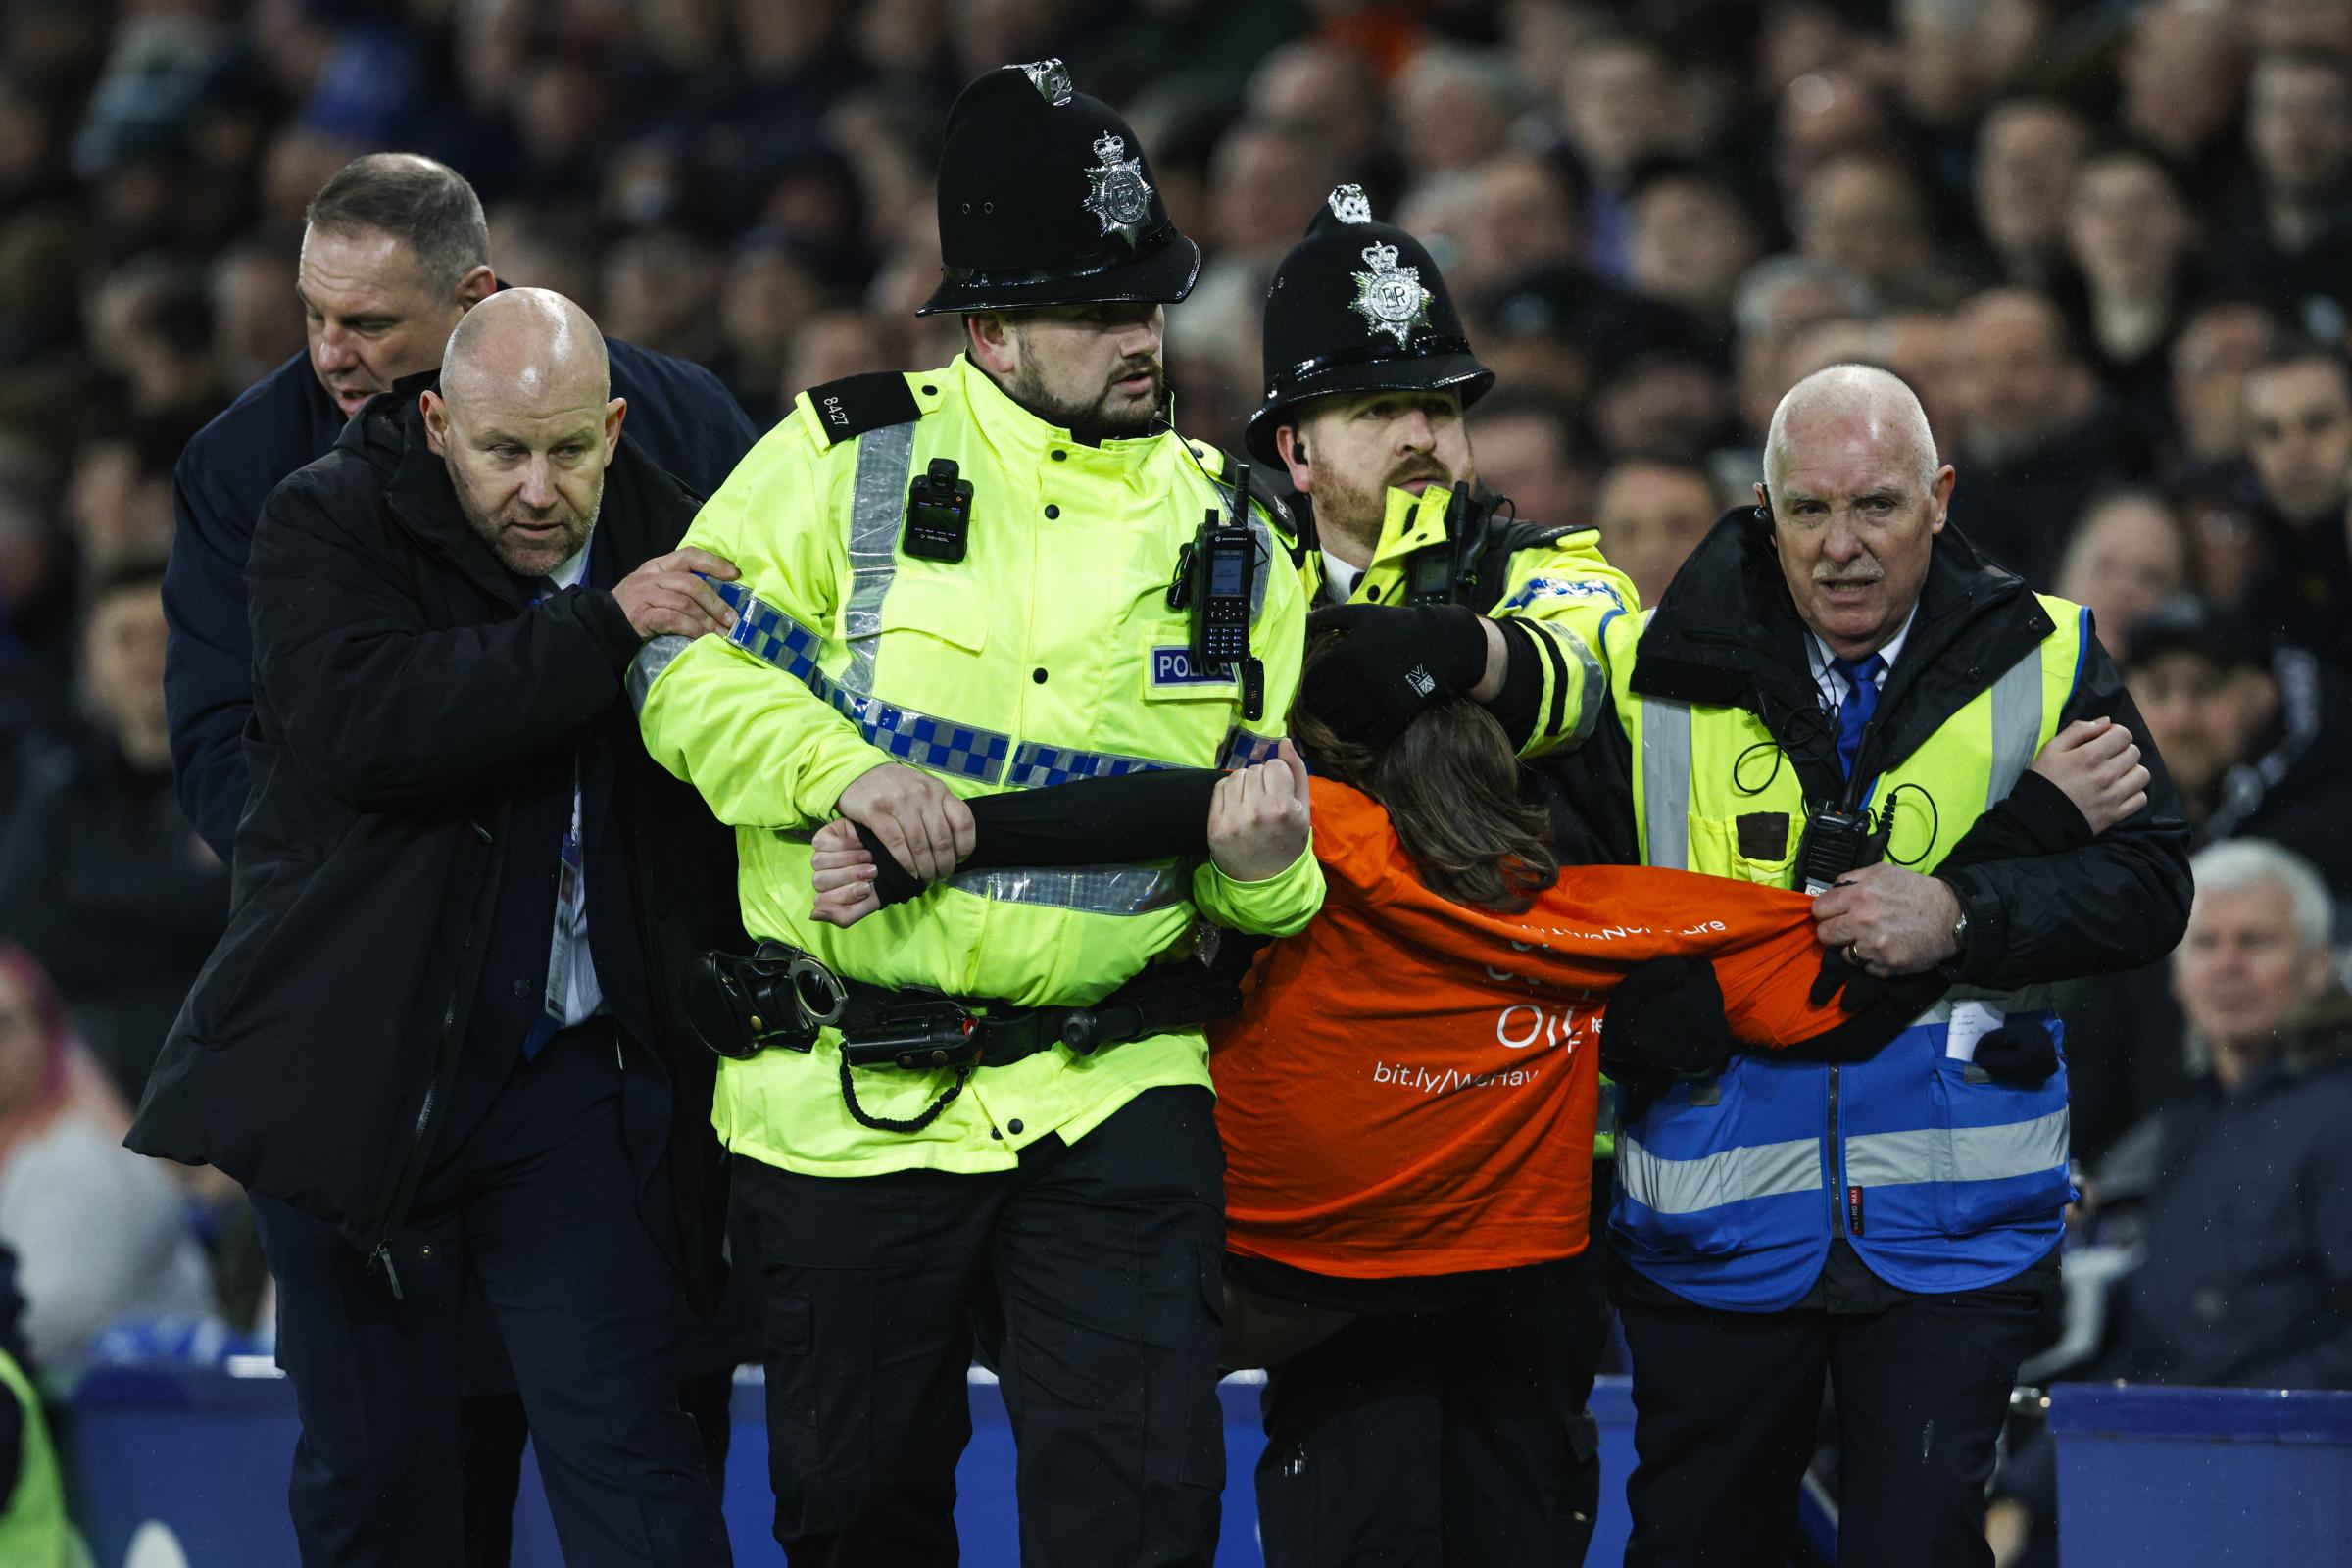 Louis McKechnie was carried out during the match at Goodison Park. Credit: PA